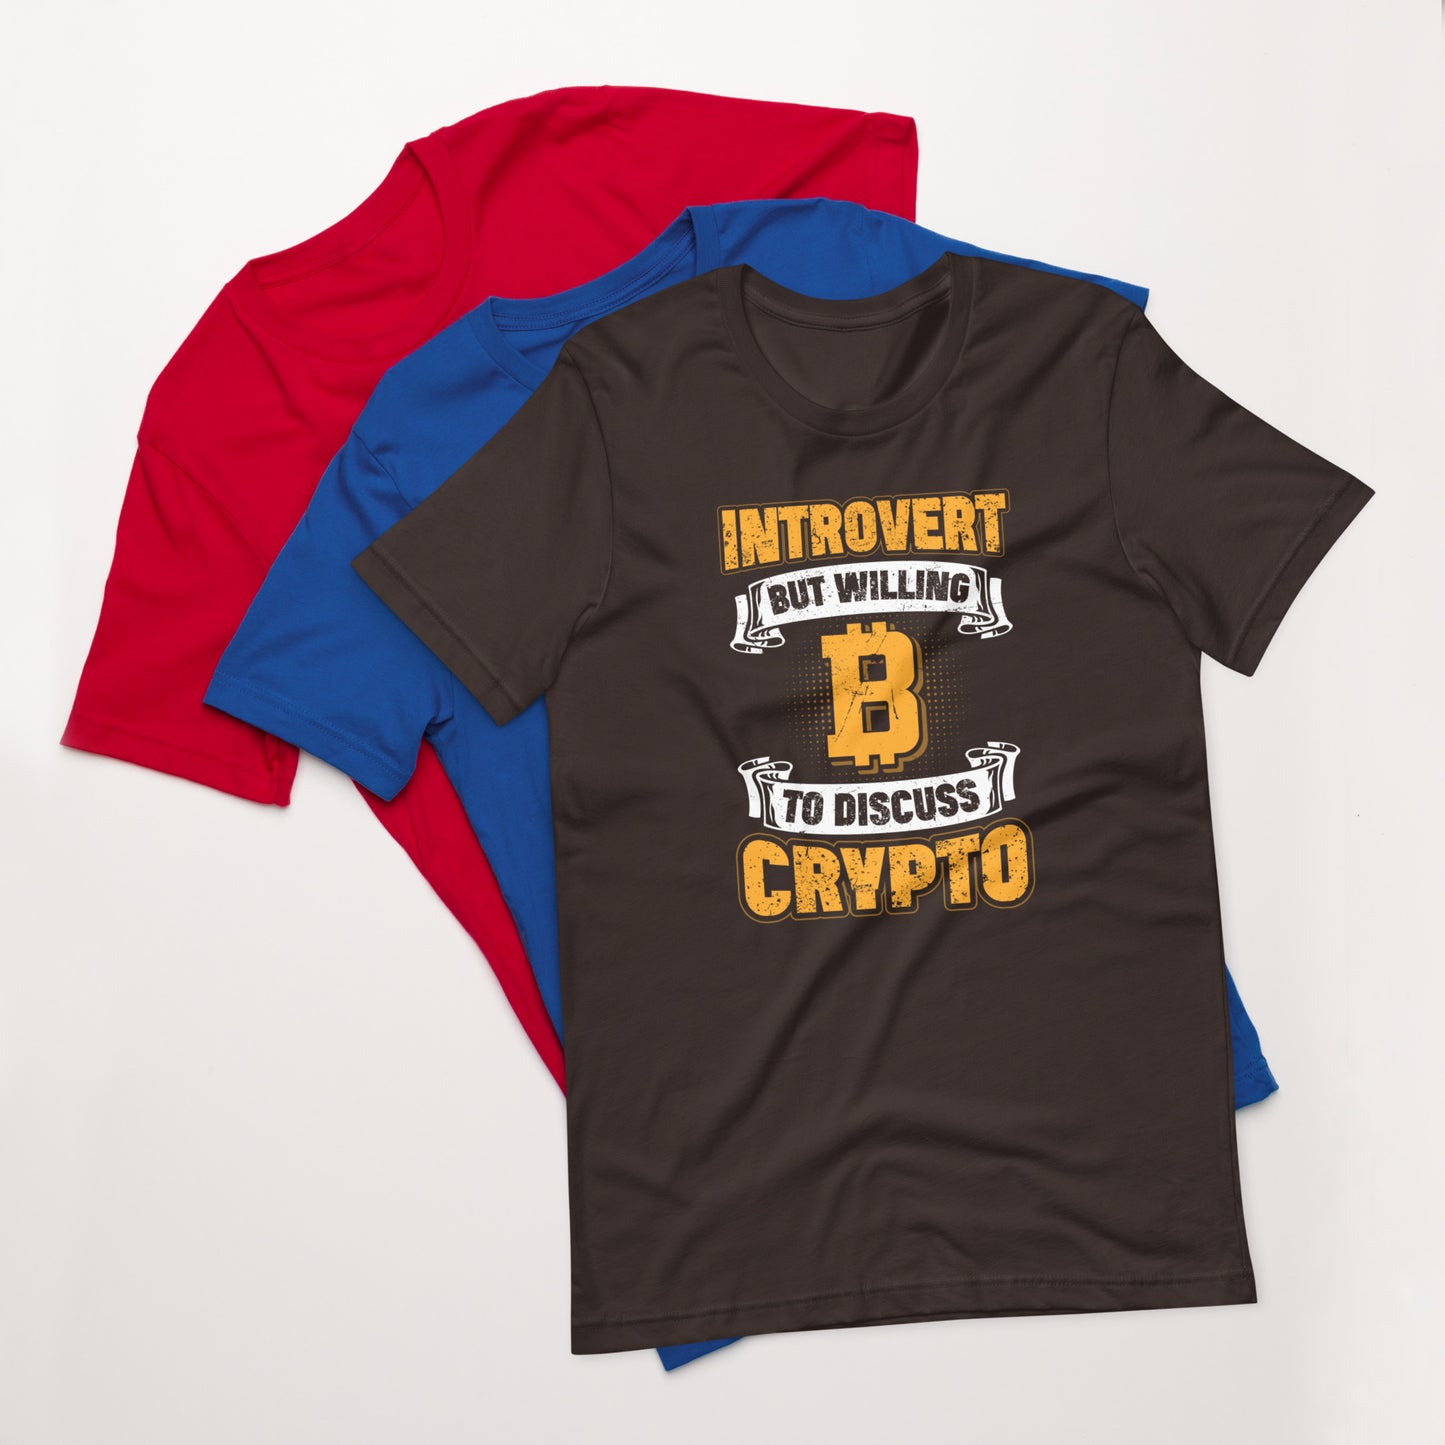 Introvert But Willing to Discuss Crypto Unisex t-shirt